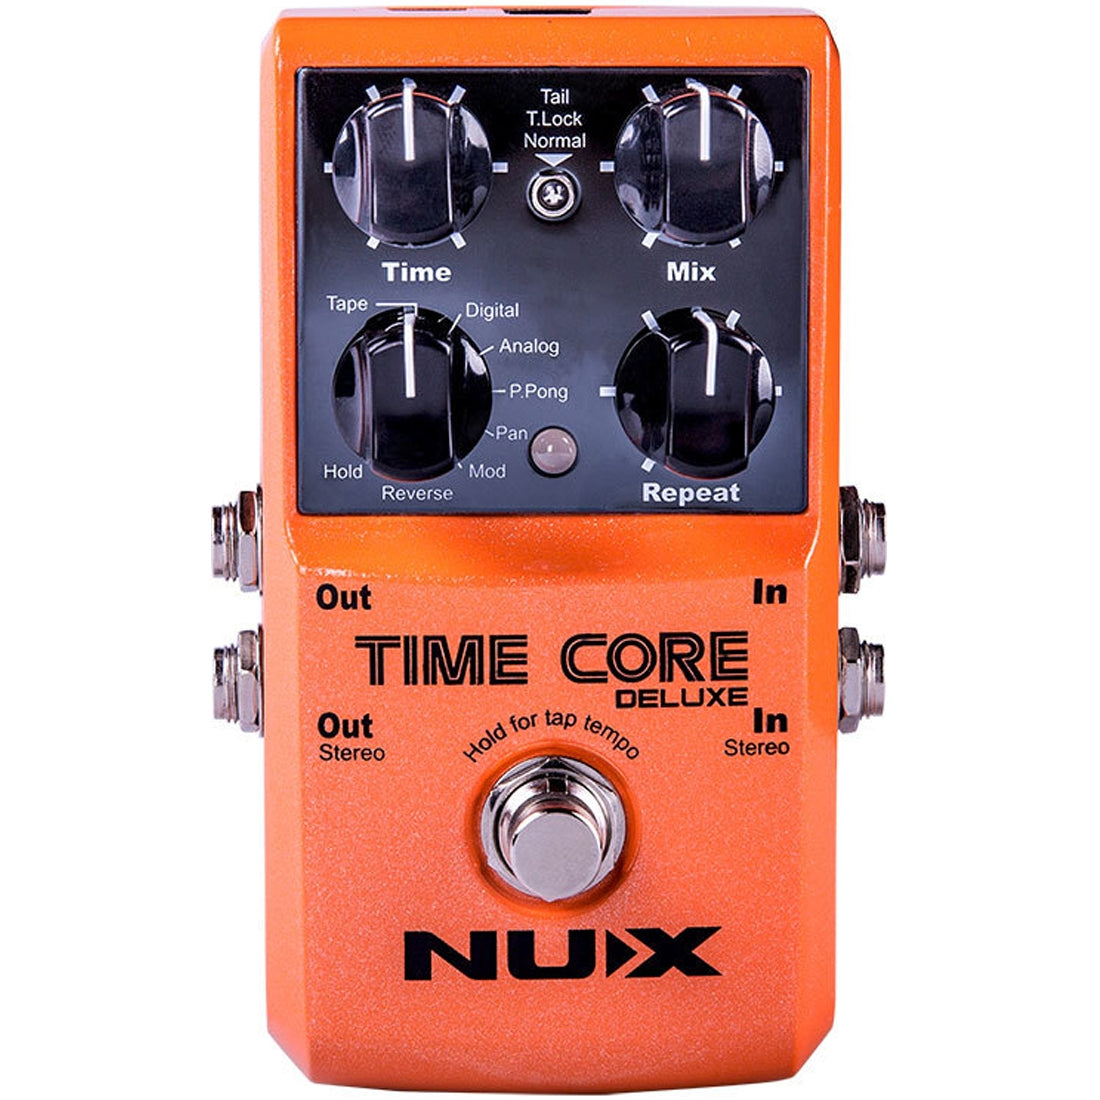 NU-X Time Core Deluxe Delay Effects Pedal